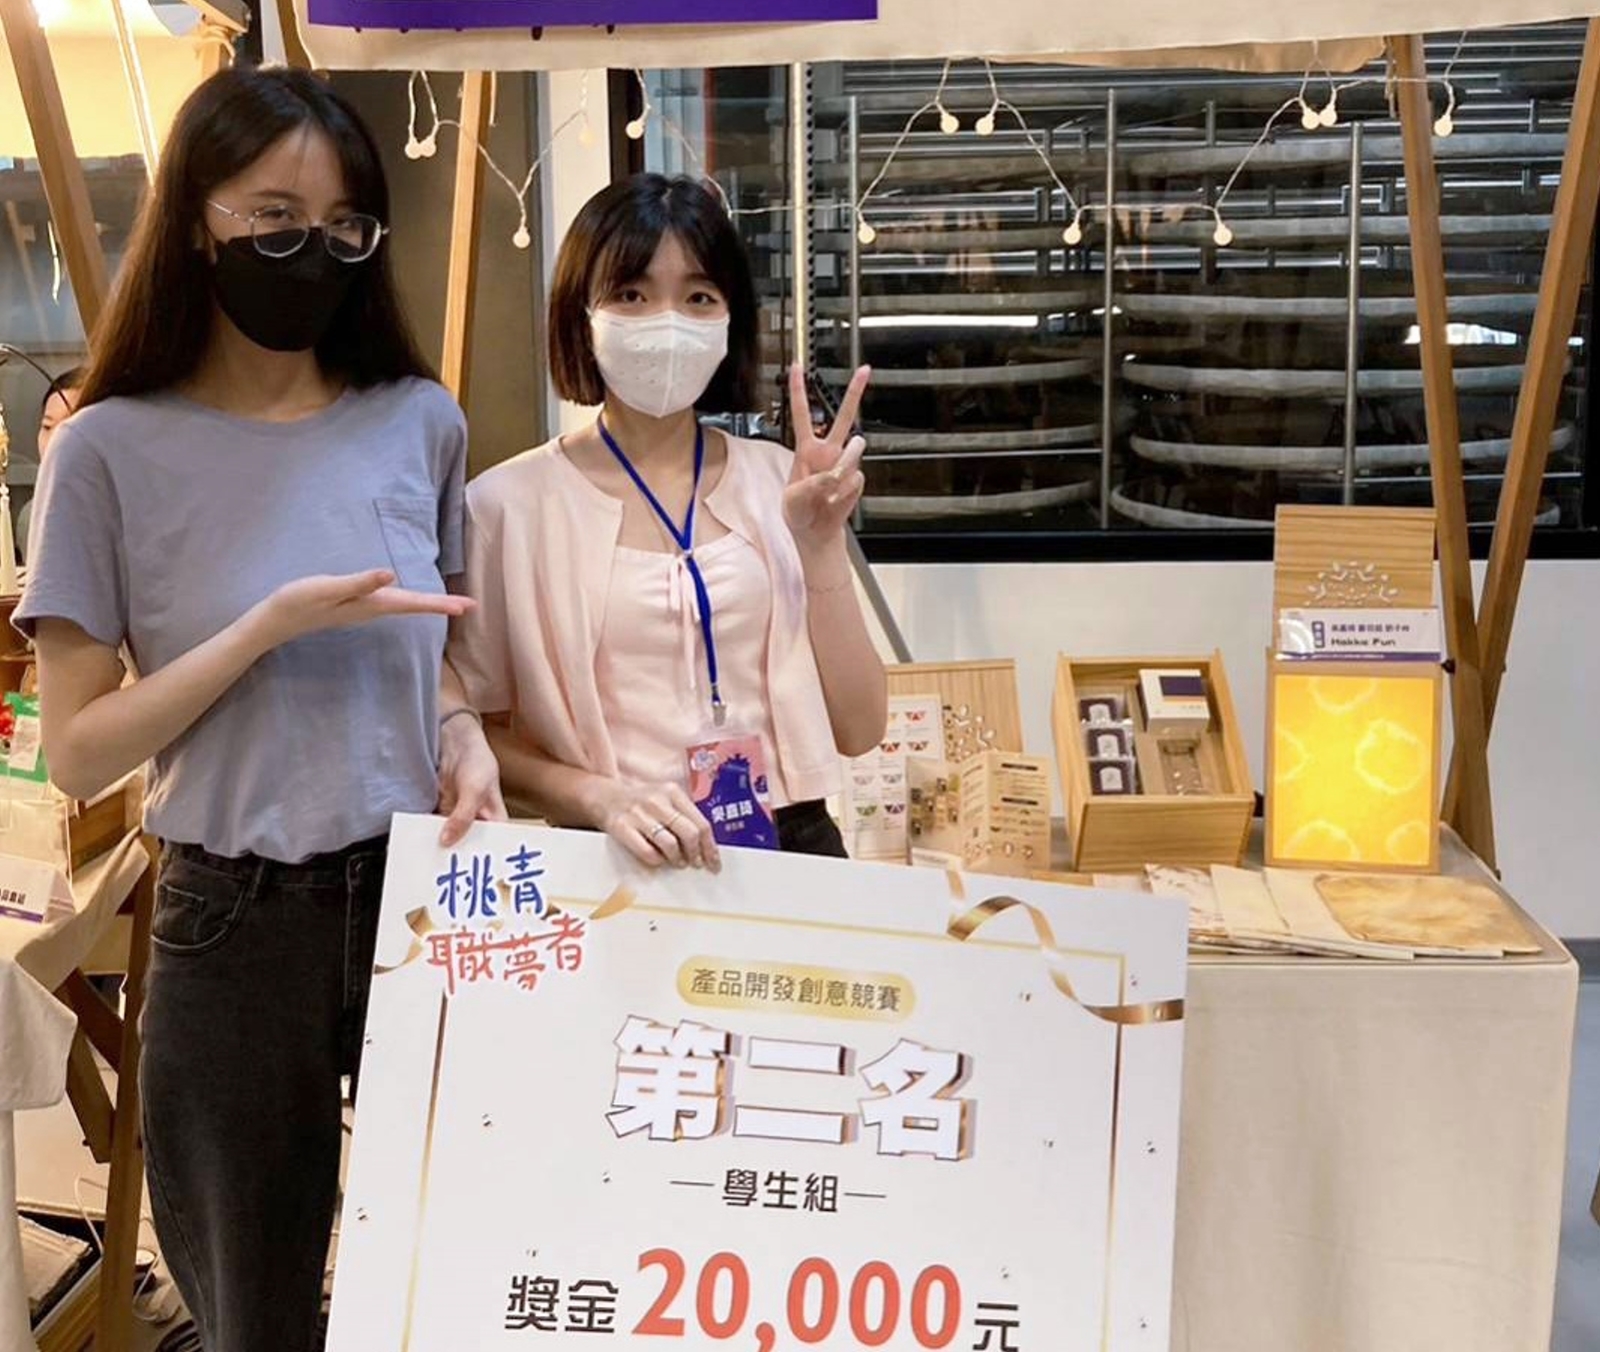 Securing the runner-up position in the student category, students from the Department of Cultural Creativity and Digital Media Design at Lunghwa excelled in the Taoyuan Youth Career Dreamer Competition for Product Development and Creativity.